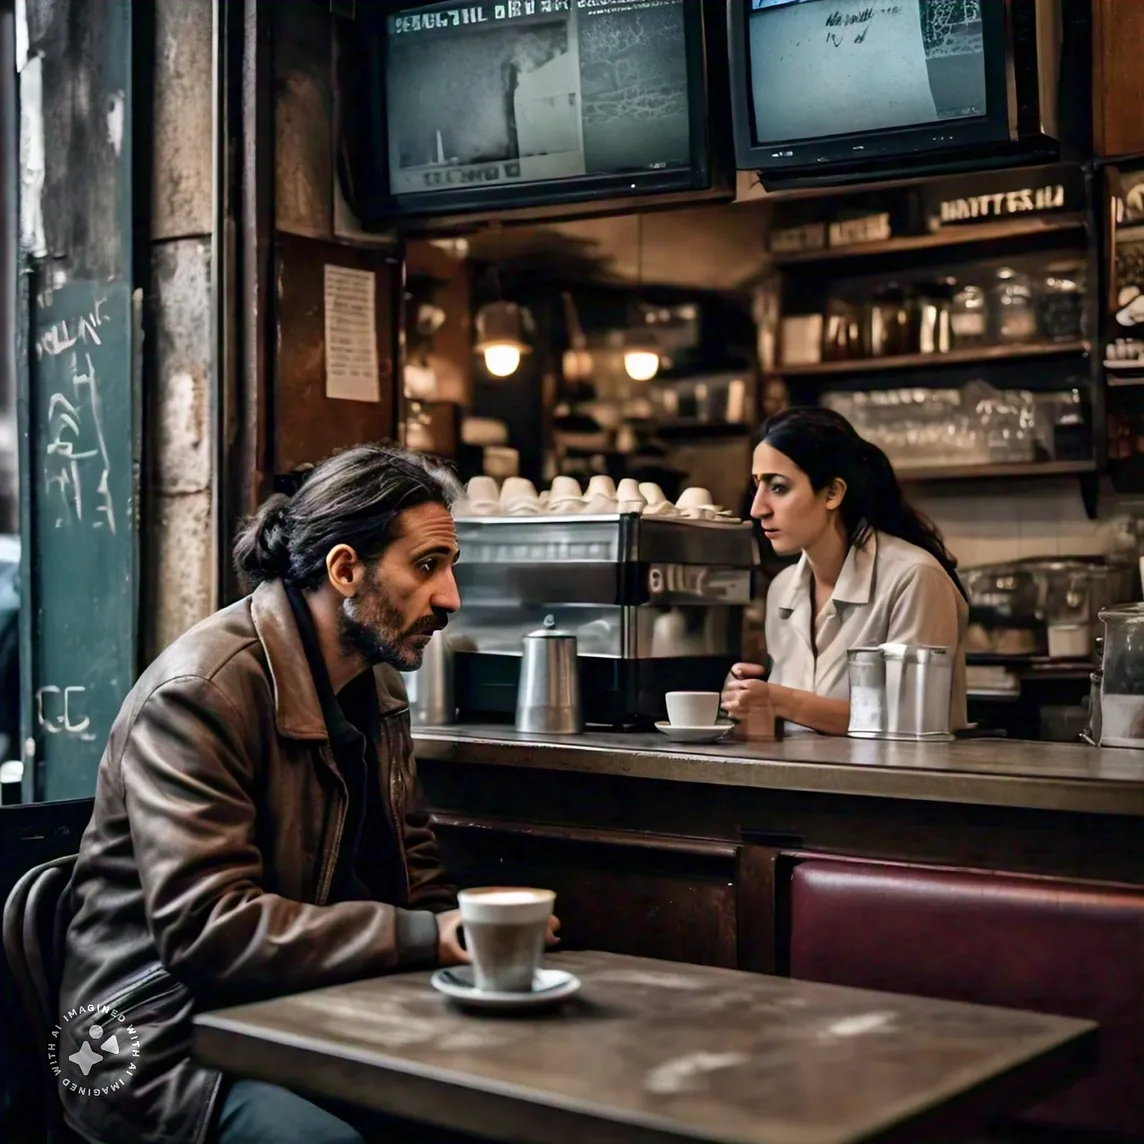 The Secret Shared by Two Strangers in a War-Torn Cafe